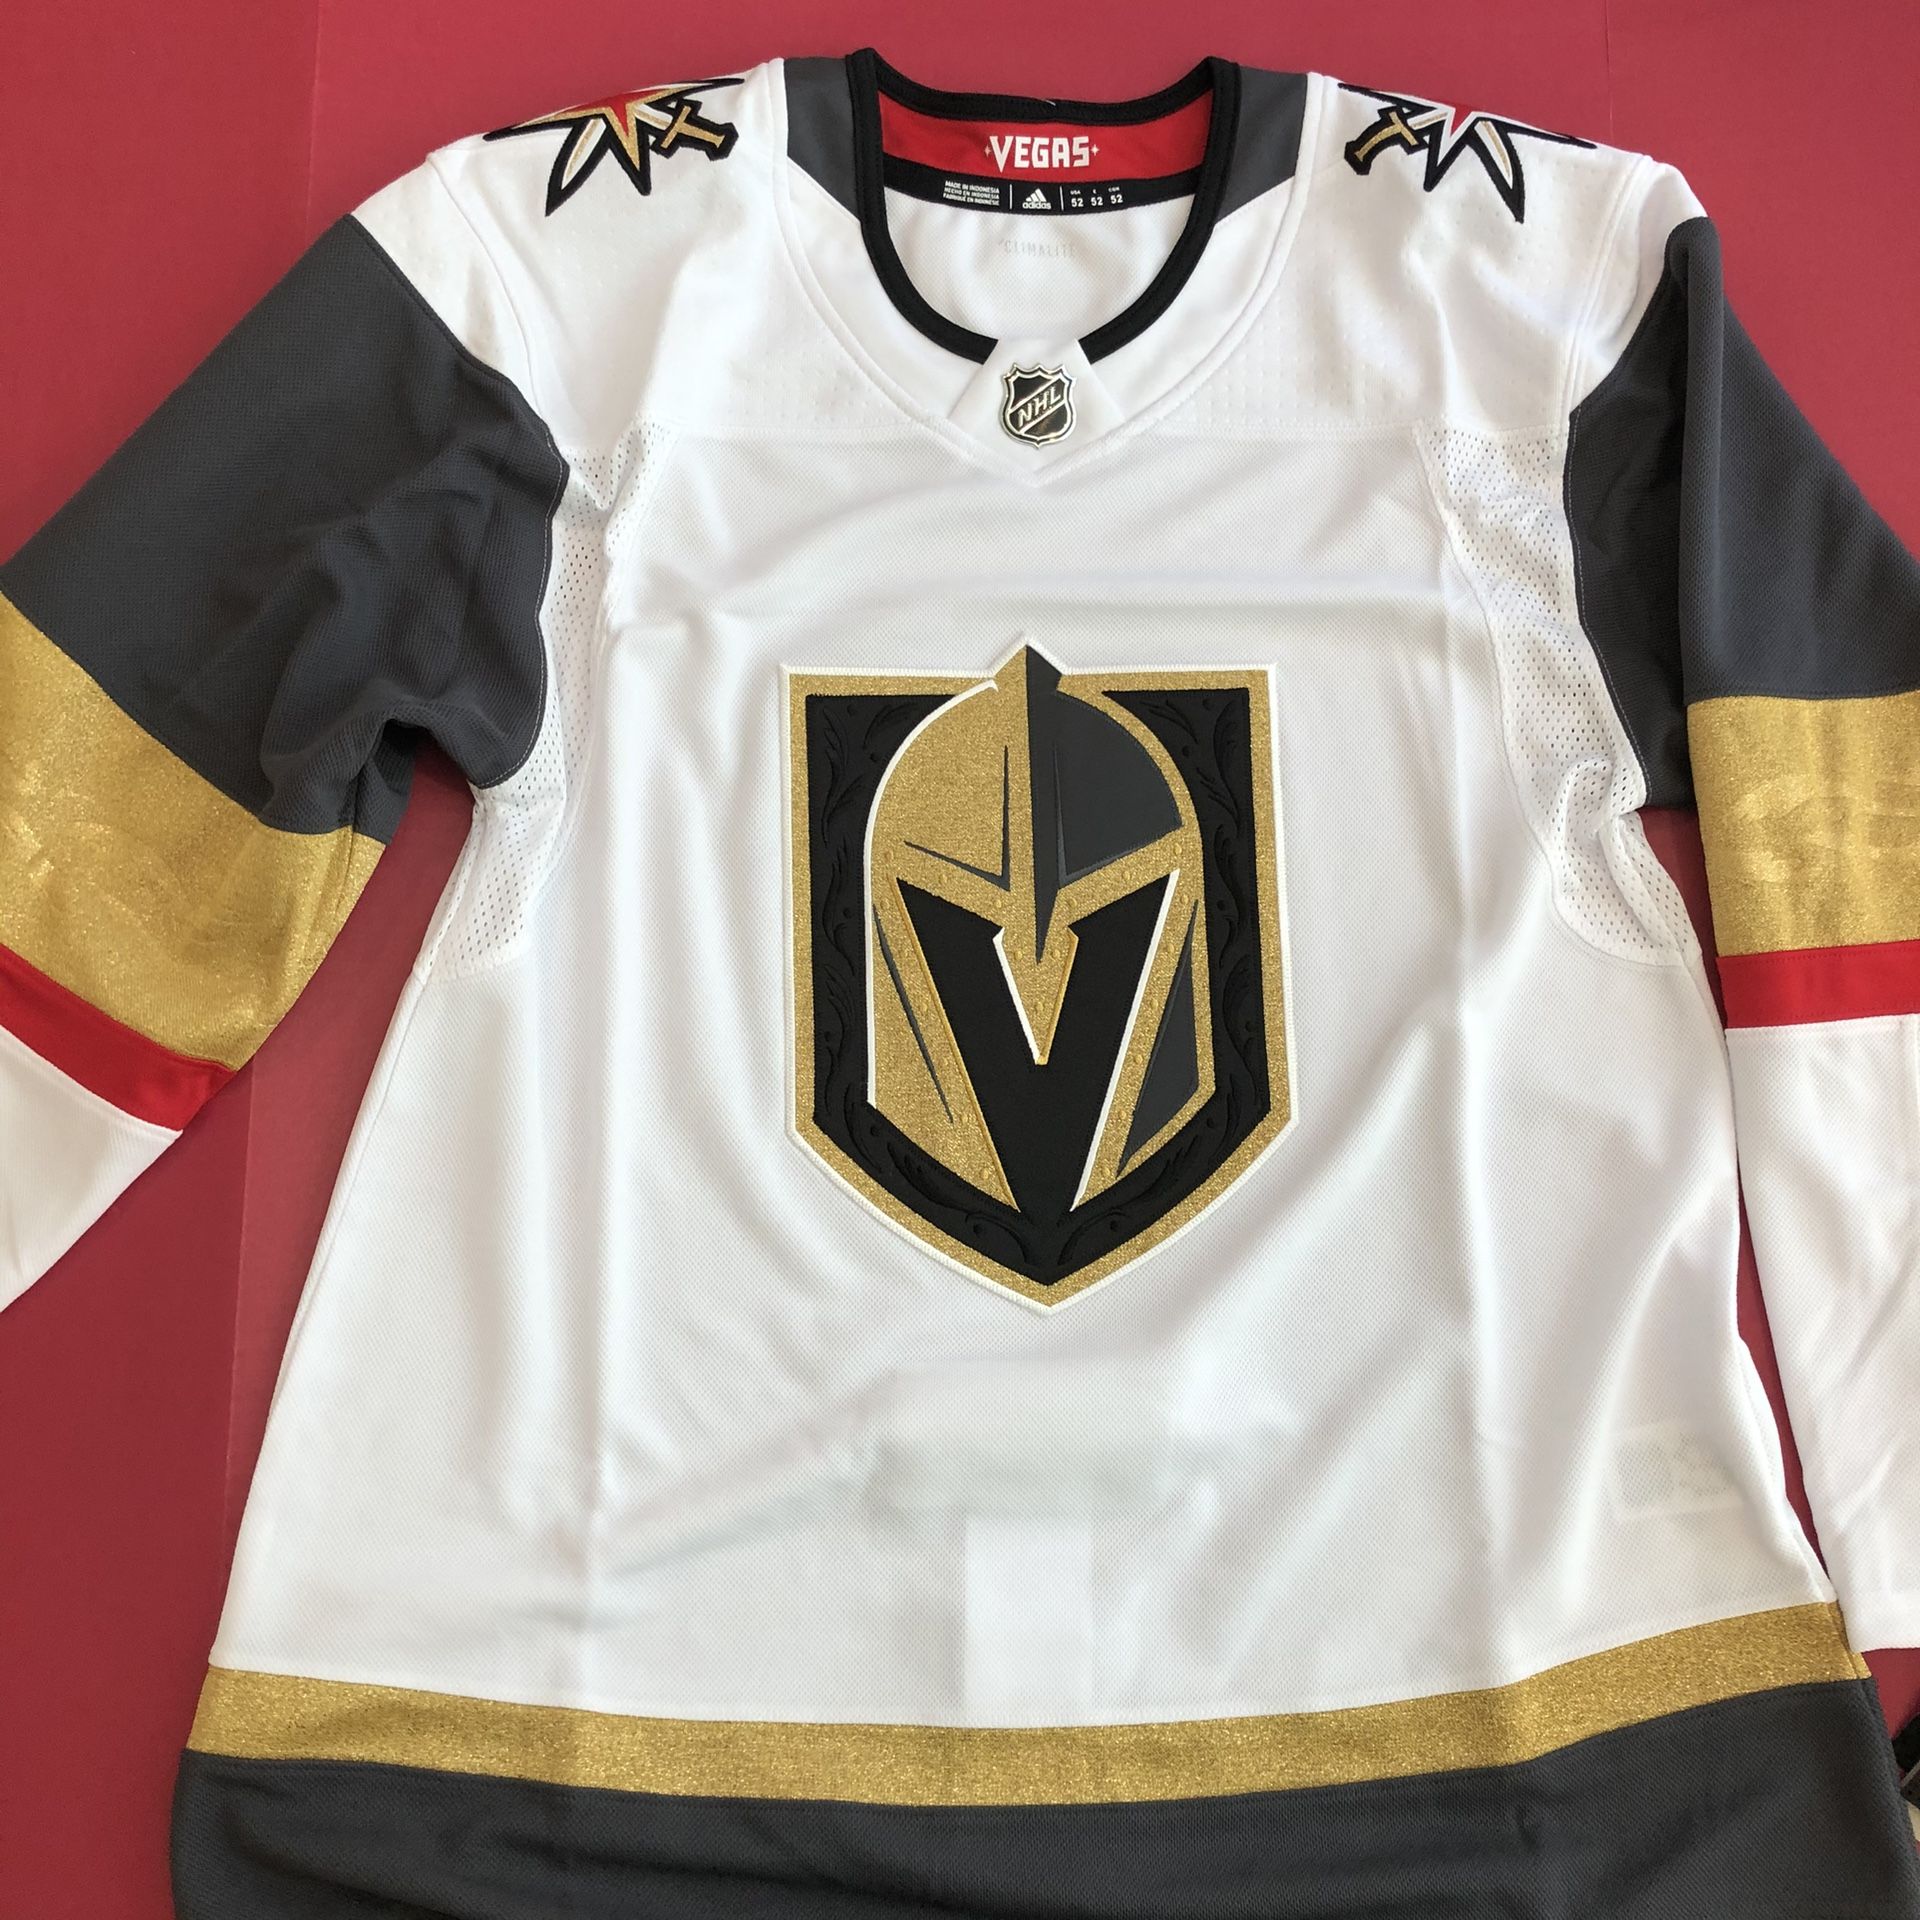 NEW Las Vegas Knights Official Hockey Jersey Sz 52 Large Sewn-on Adidas MSRP=$300